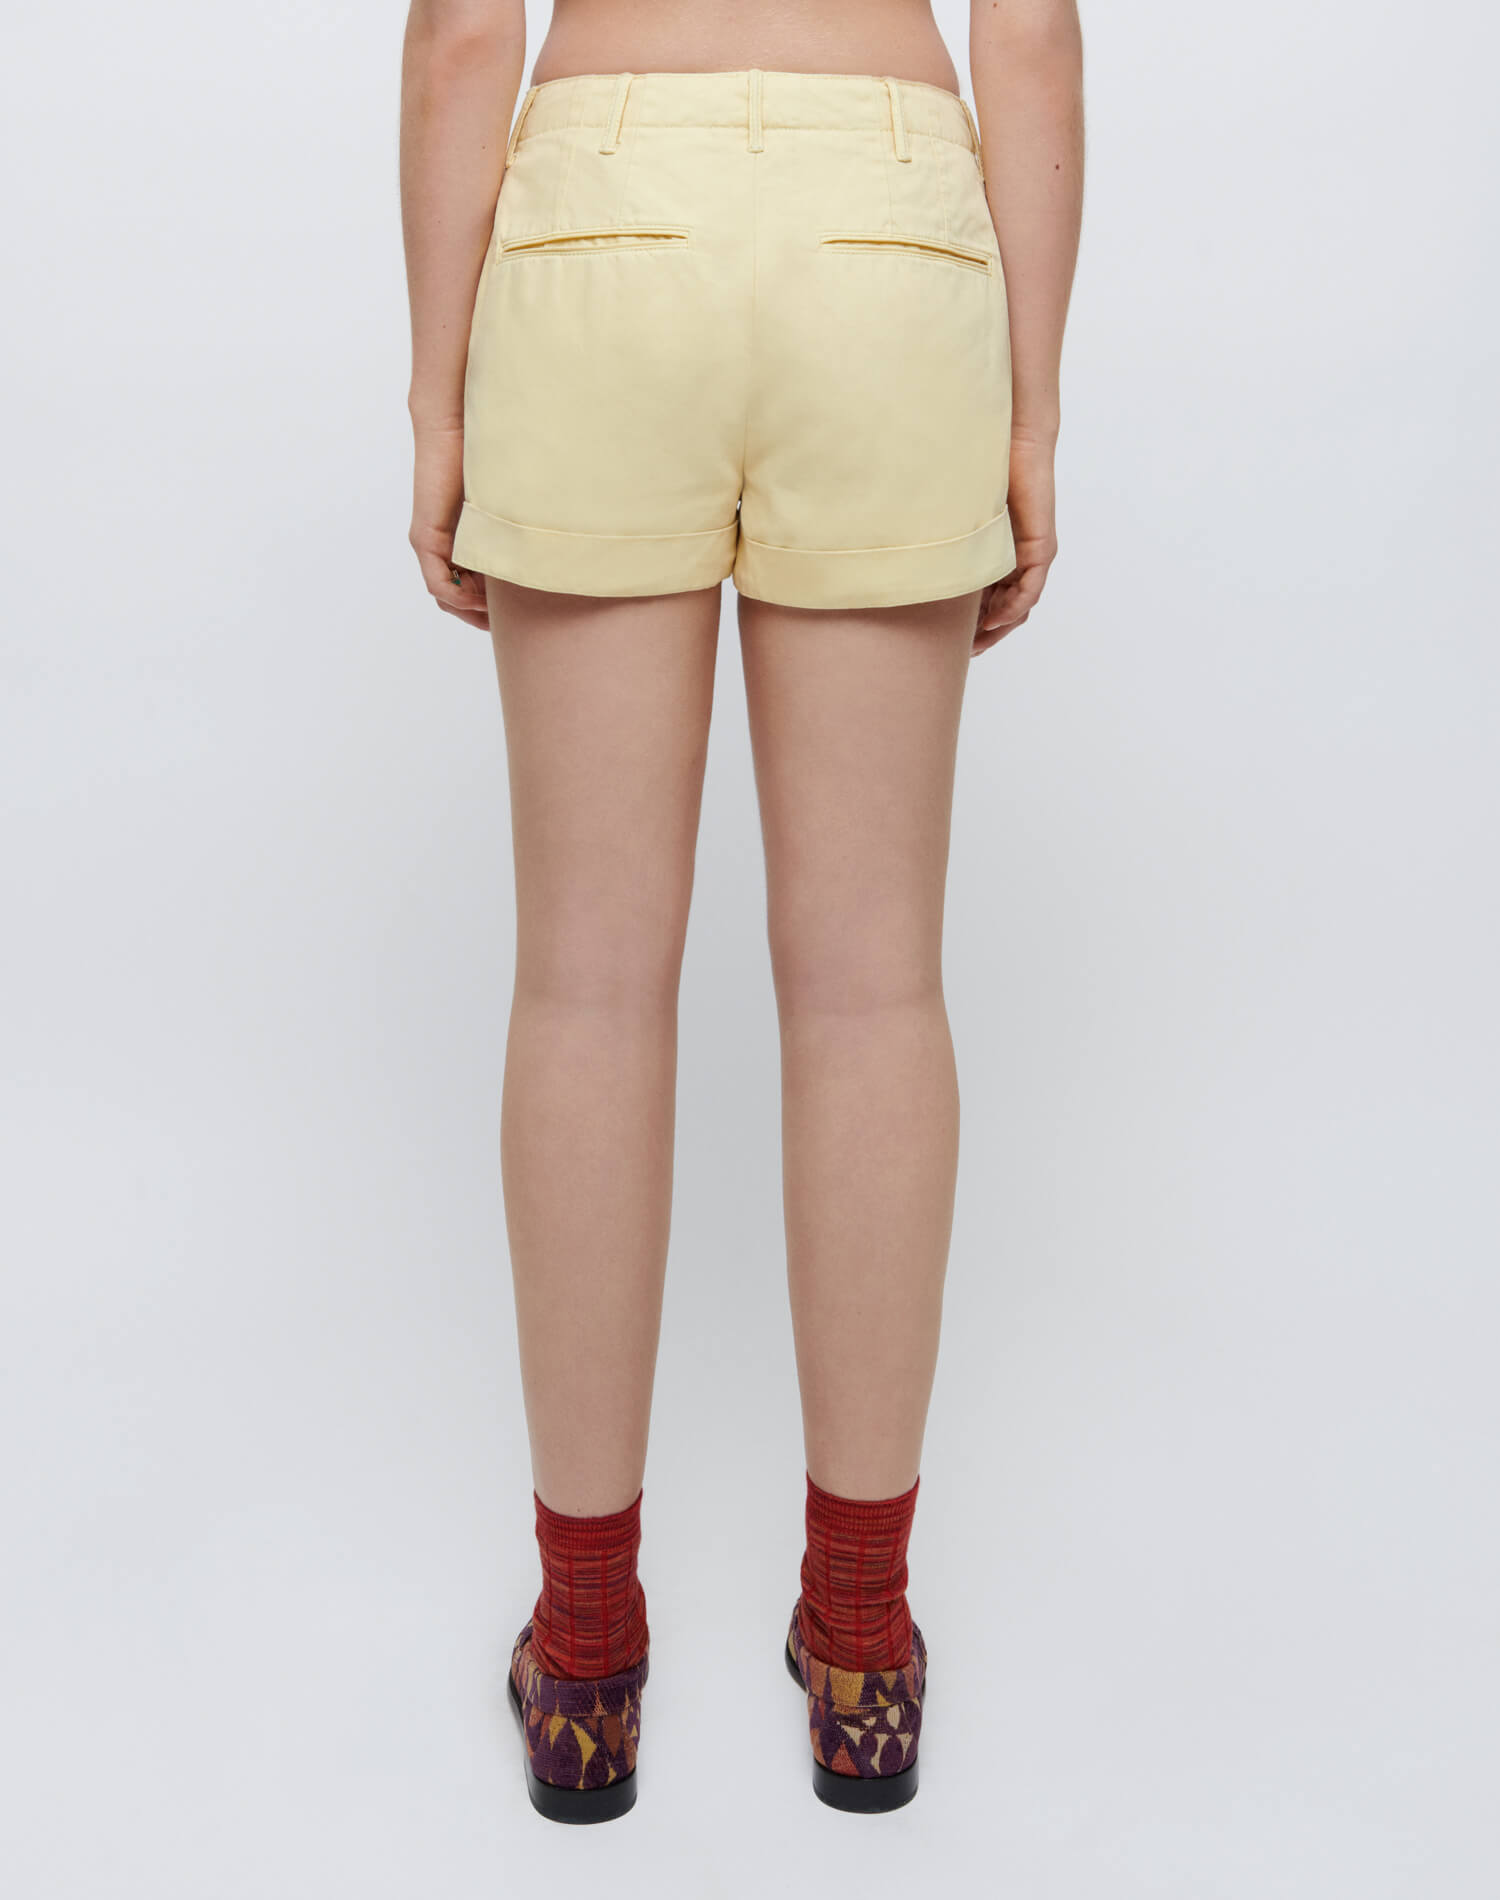 90s Trouser Shorts - Washed Buttercream